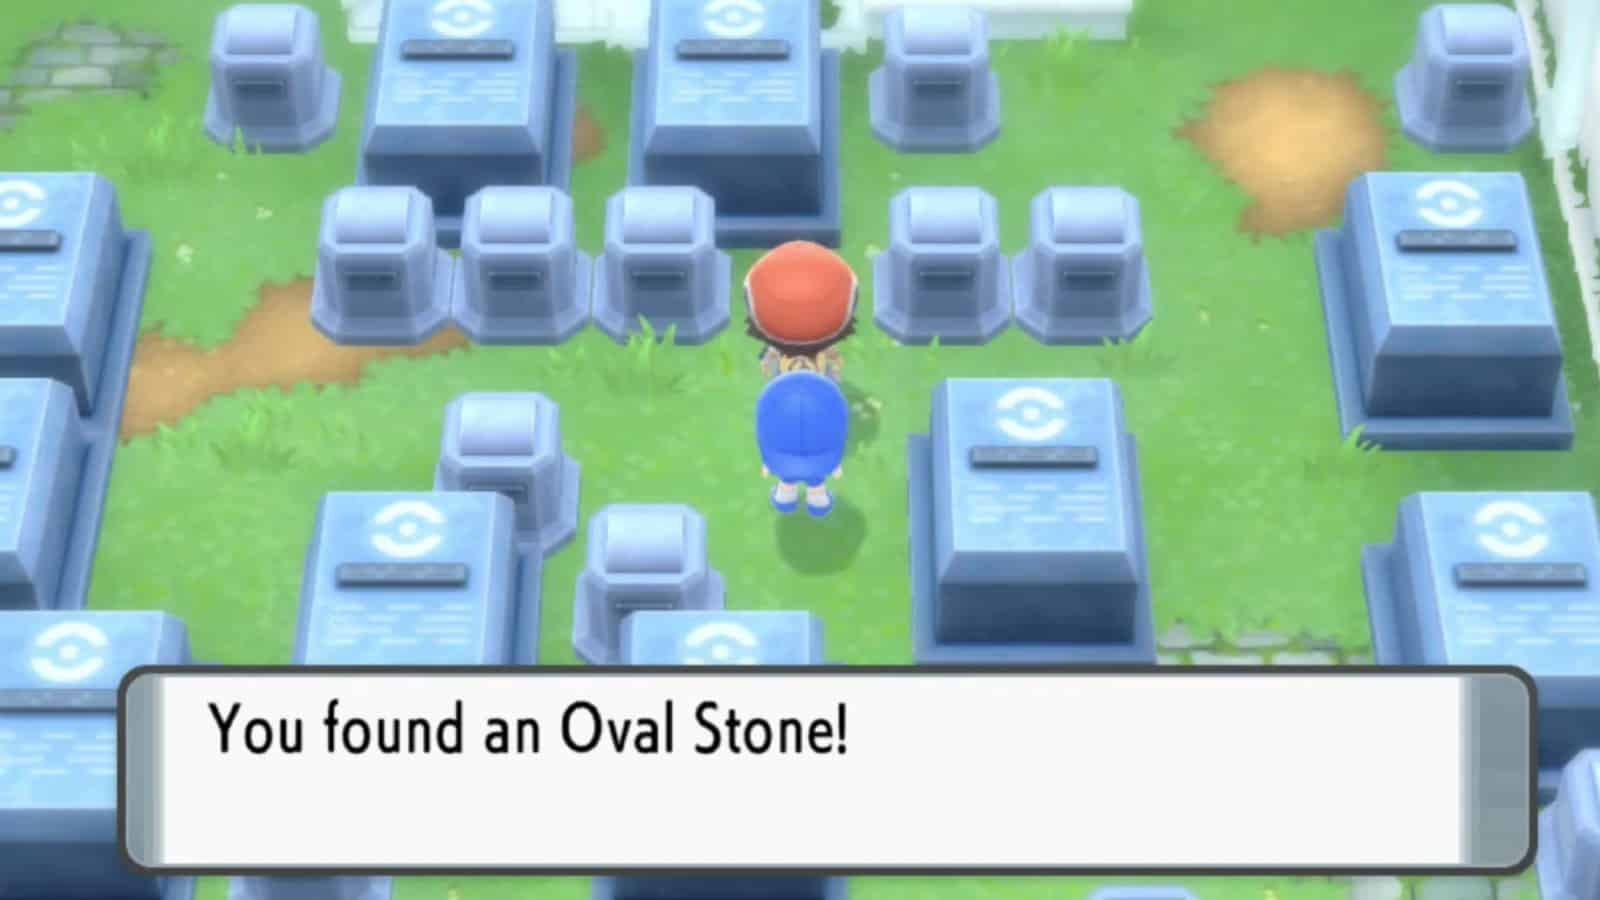 The graveyard in the Lost Tower has an Oval Stone in it